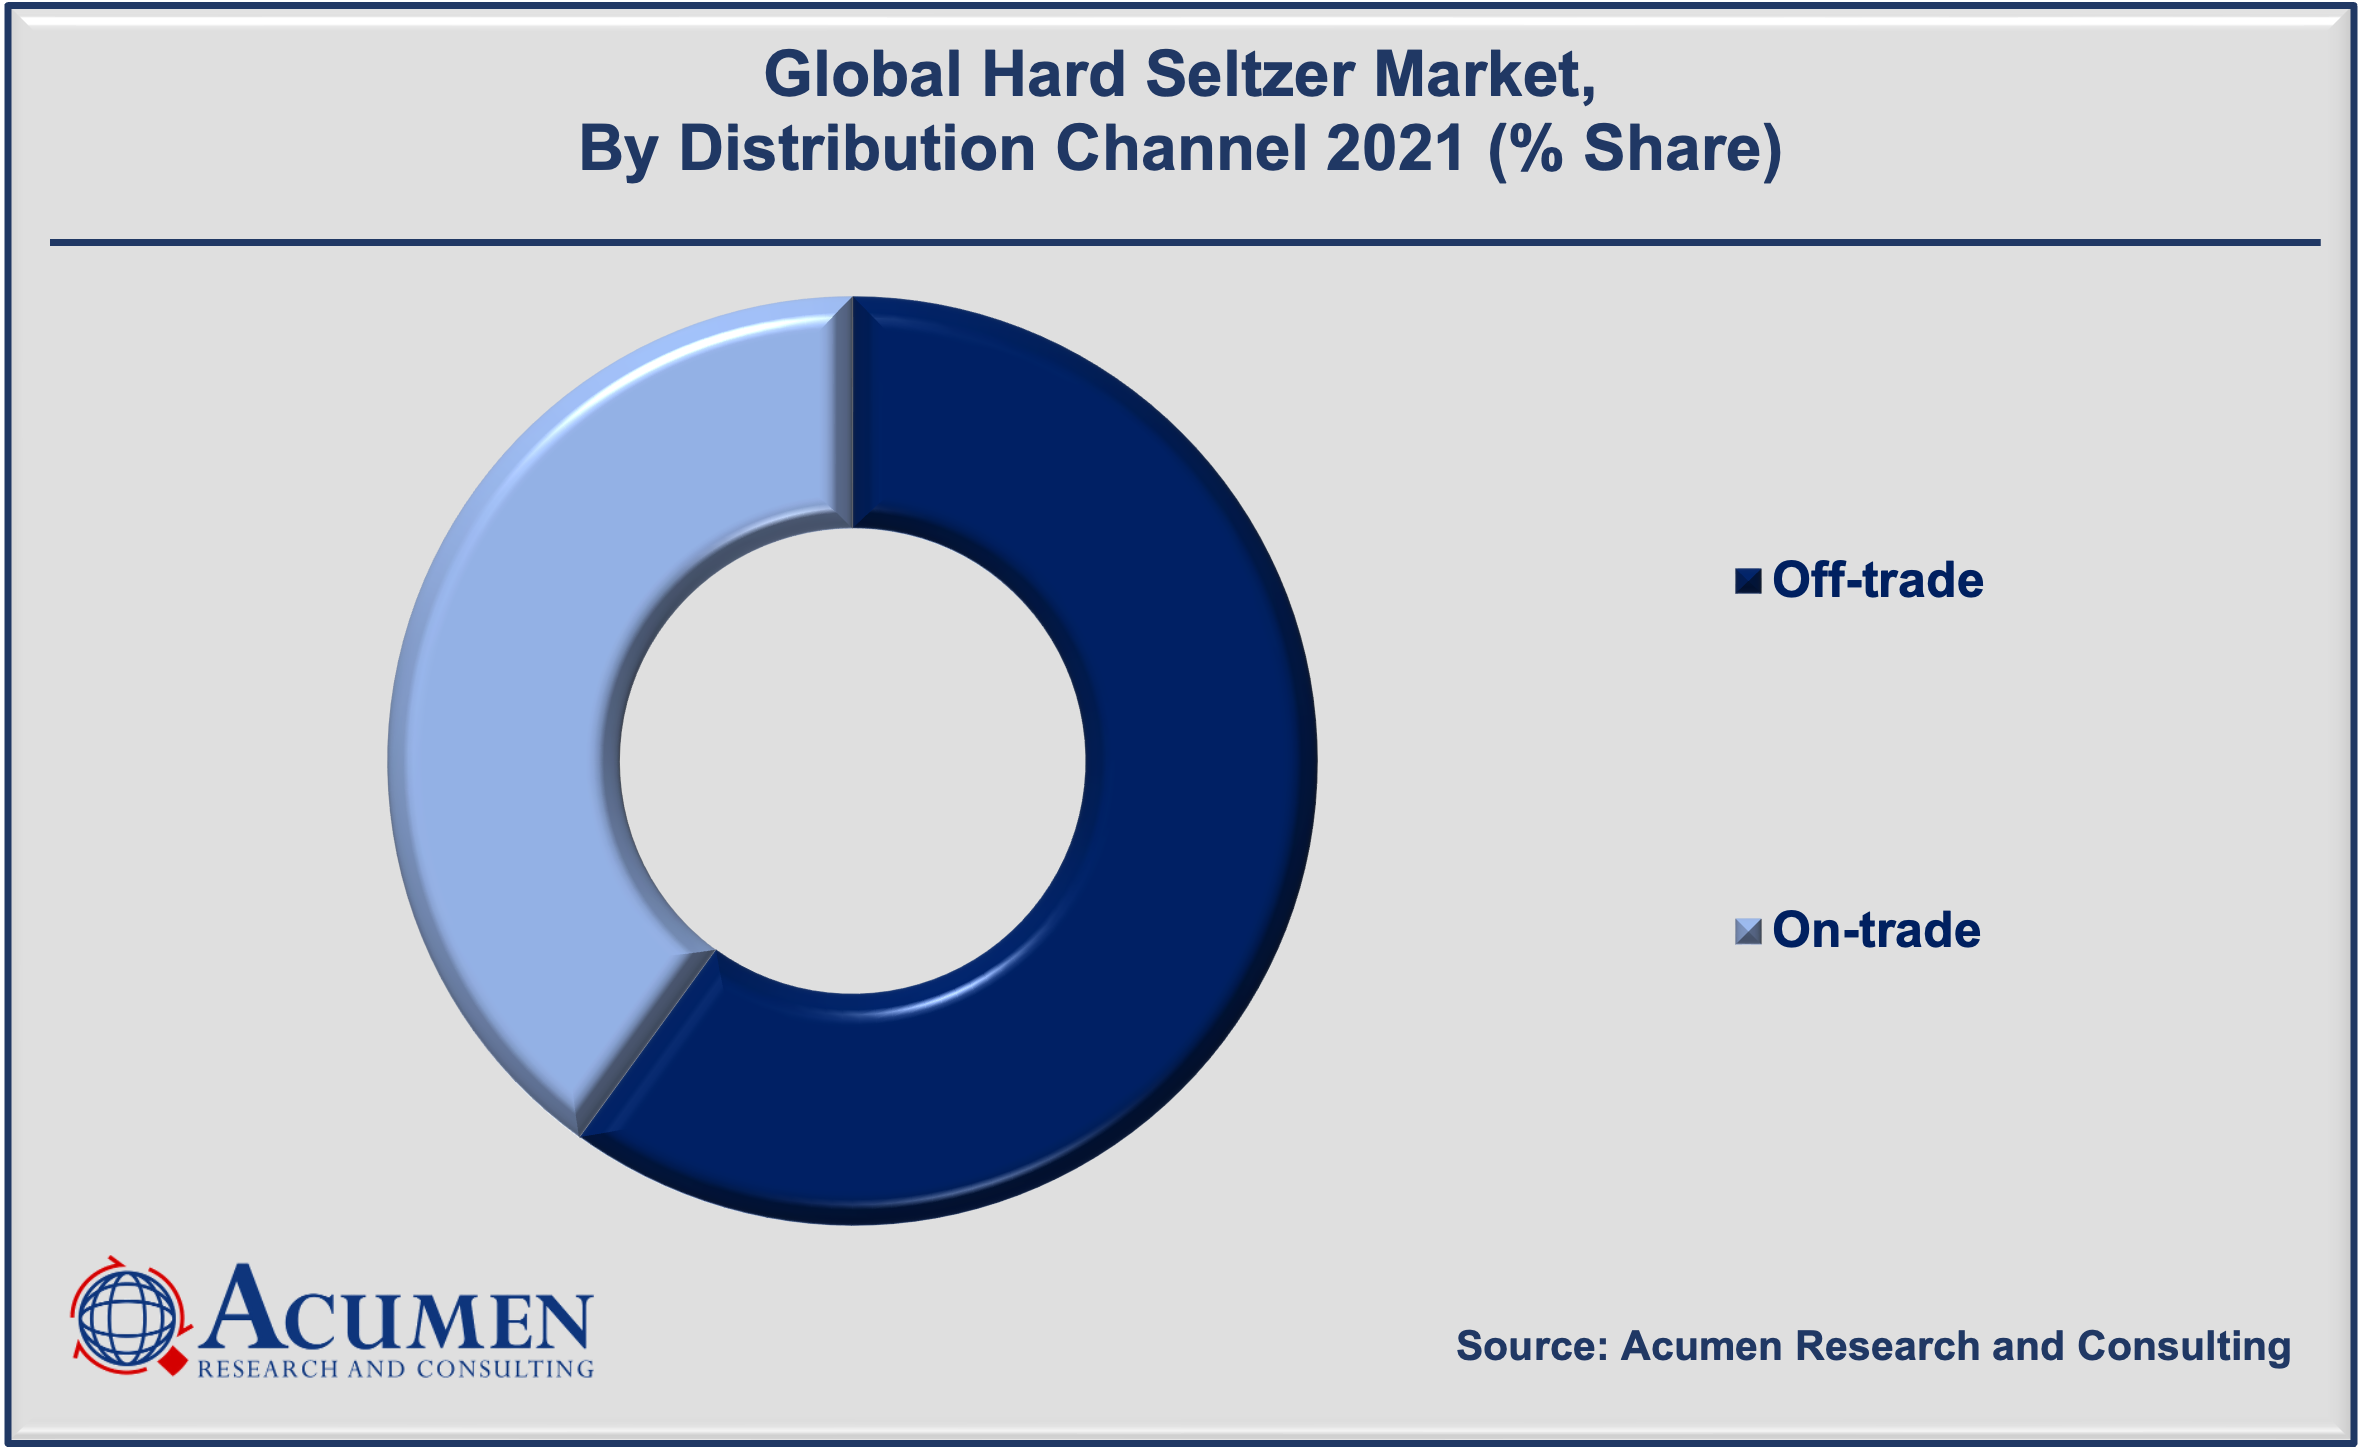 Hard Seltzer Market Analysis accounted for USD 8,567 Million in 2021 and is expected to reach the market value of USD 41,669 Million by 2030 growing at a CAGR of 19.7% during the forecast period from 2022 to 2030.